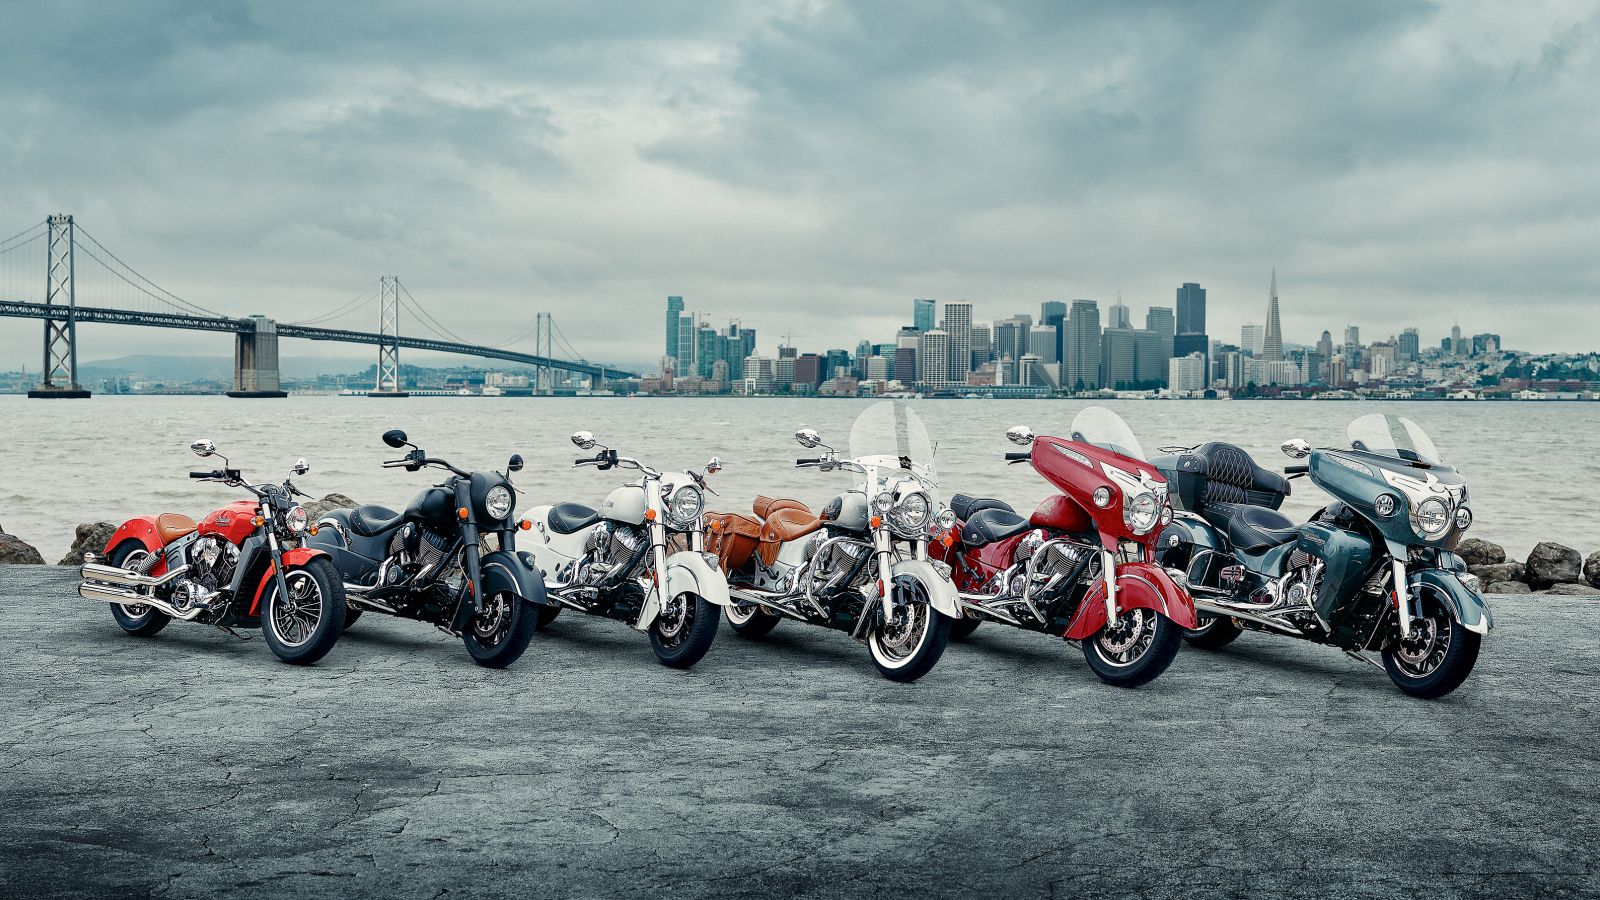 2016 Indian Issues Recall For Thousands Of Thunderstroke Models Due To Fire Hazard